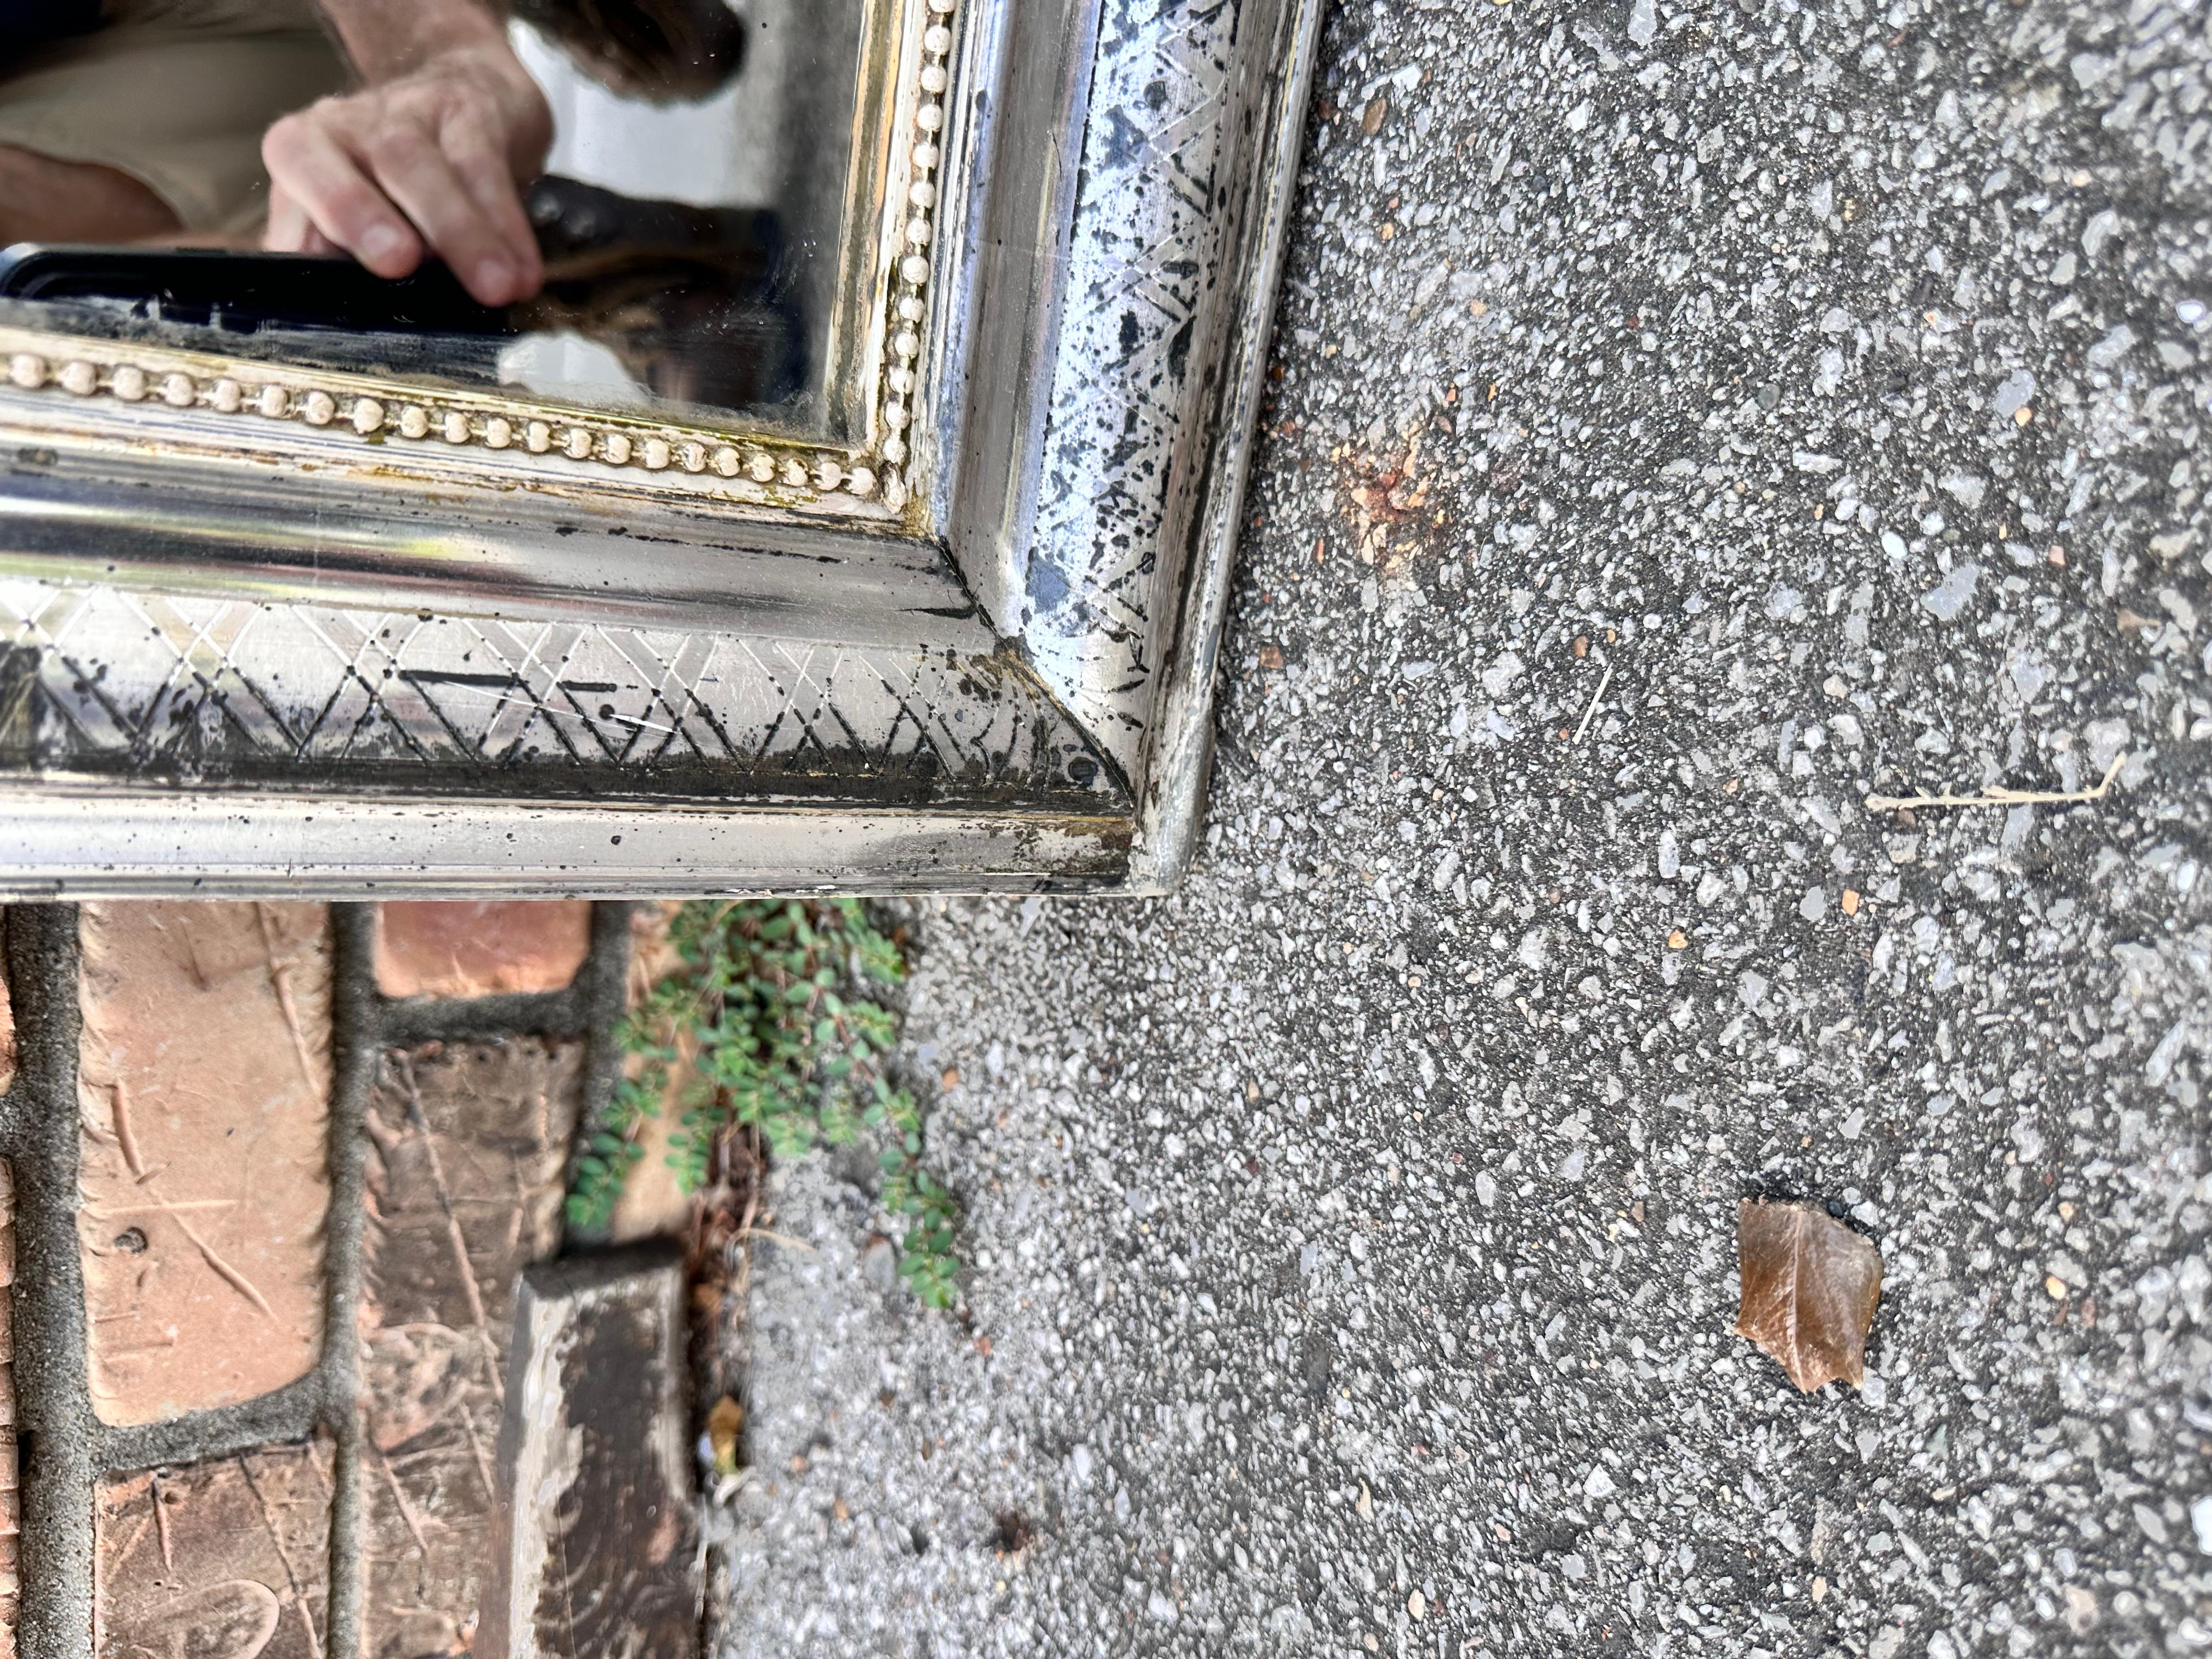 This is a gorgeous 19th century Louis Philippe Mirror! There is hand carved detail on the edges of the mirror in a simple but pretty style. Silver mirrors are harder to come by in this style making finds like this one special. This mirror has aged